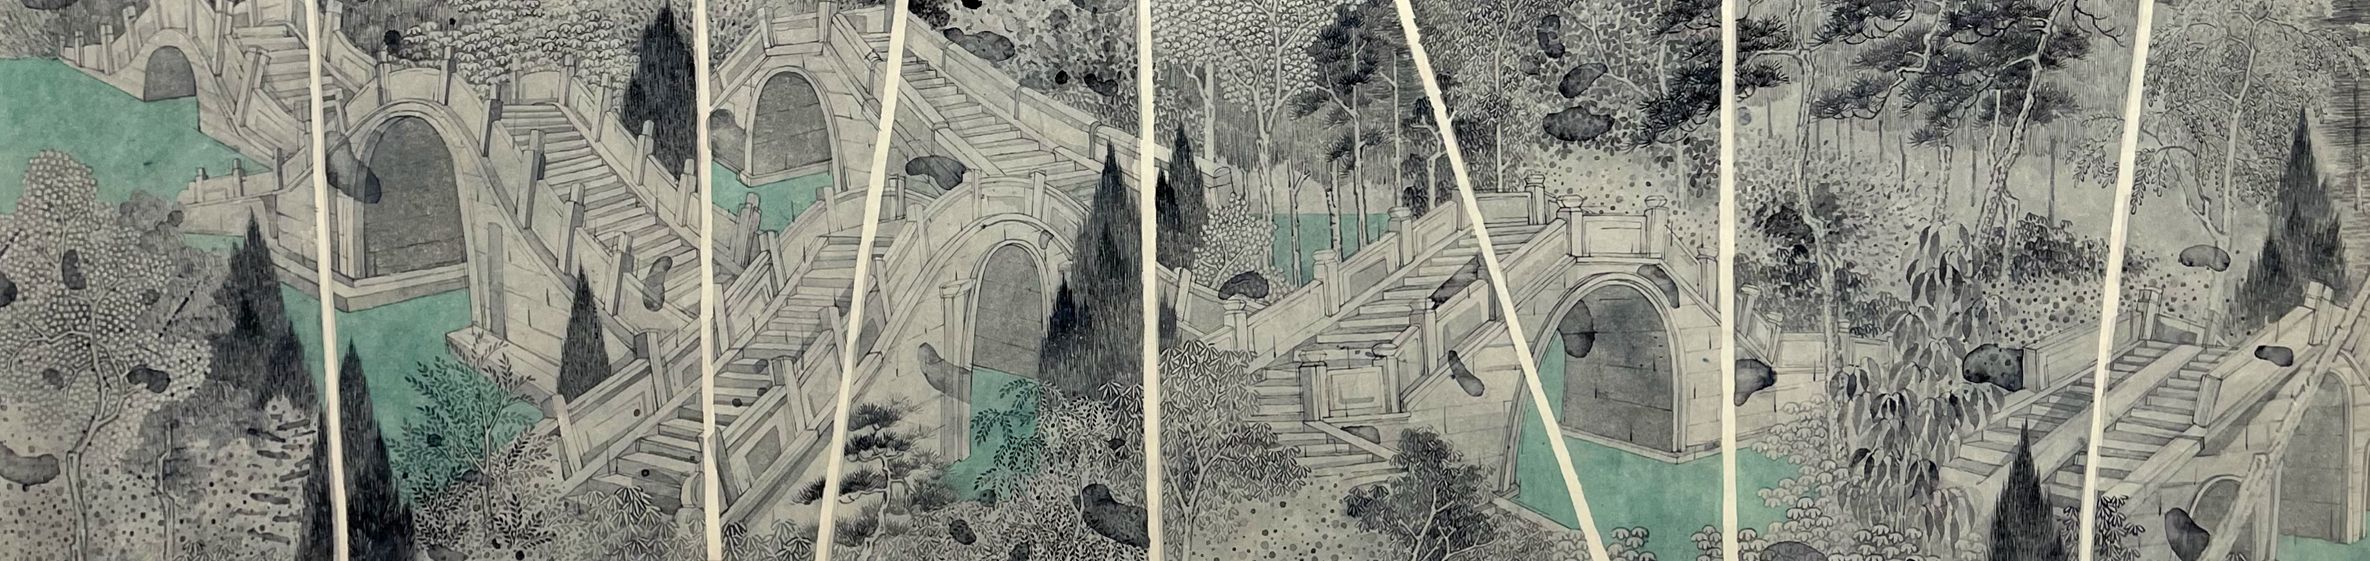 Zhang Ying, Images of Noon, 2020, Chinese ink & colour on rice paper, 29x119cm